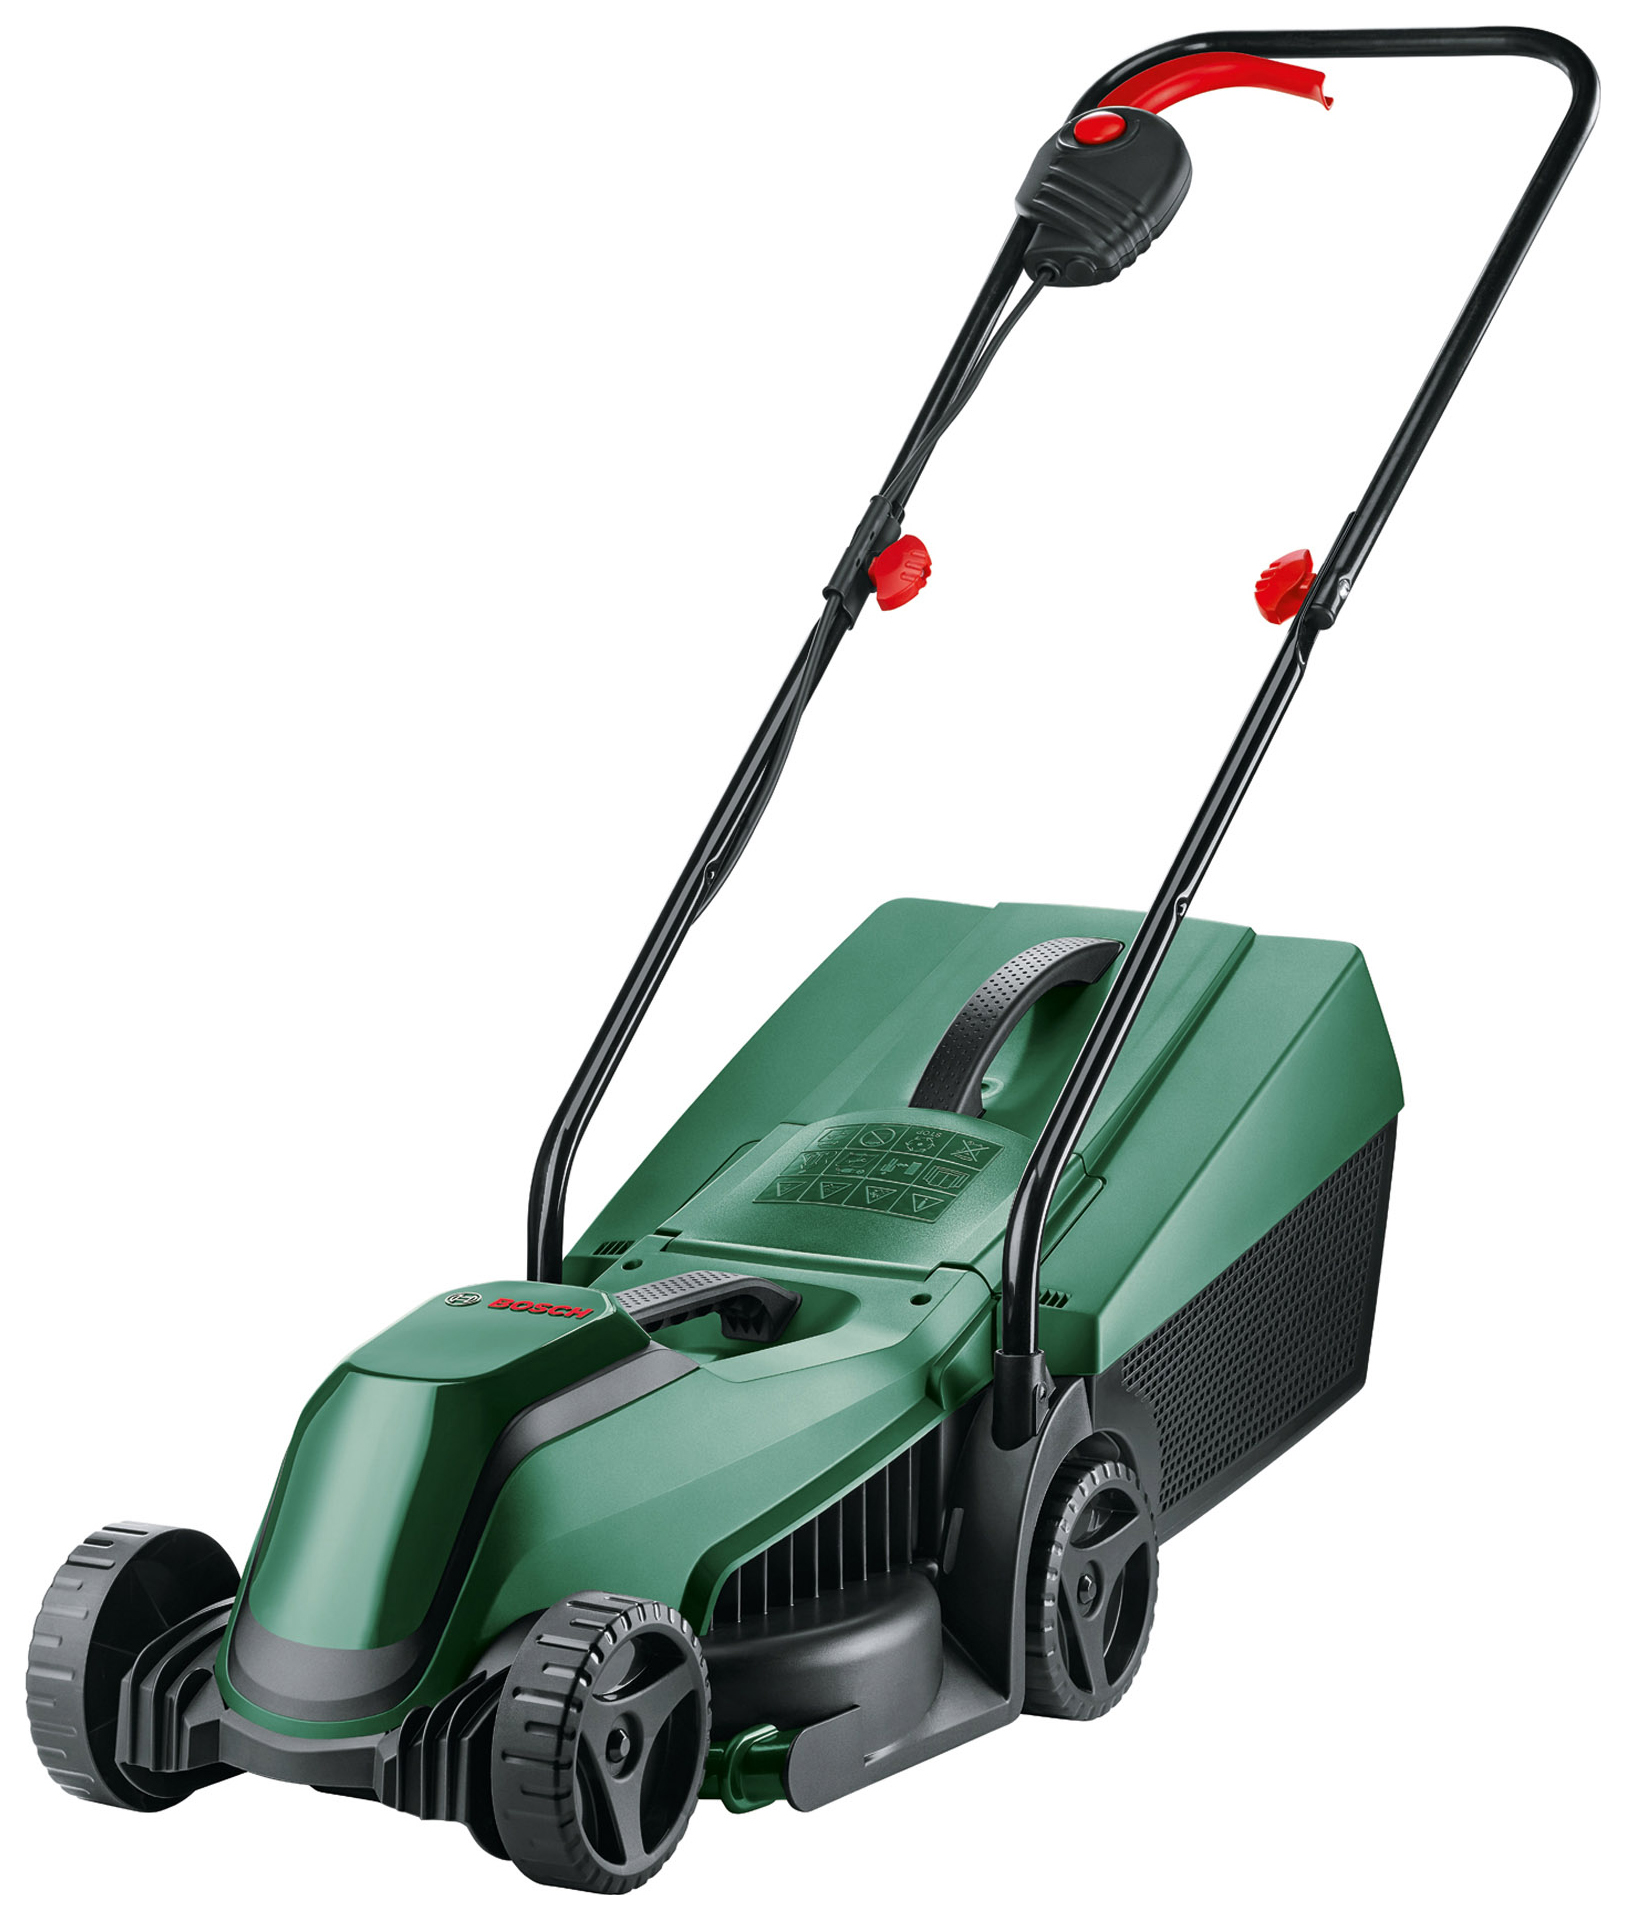 Bosch Easy Mower 18V-32 Cordless Lawn Mower with 1x 4.0Ah Battery